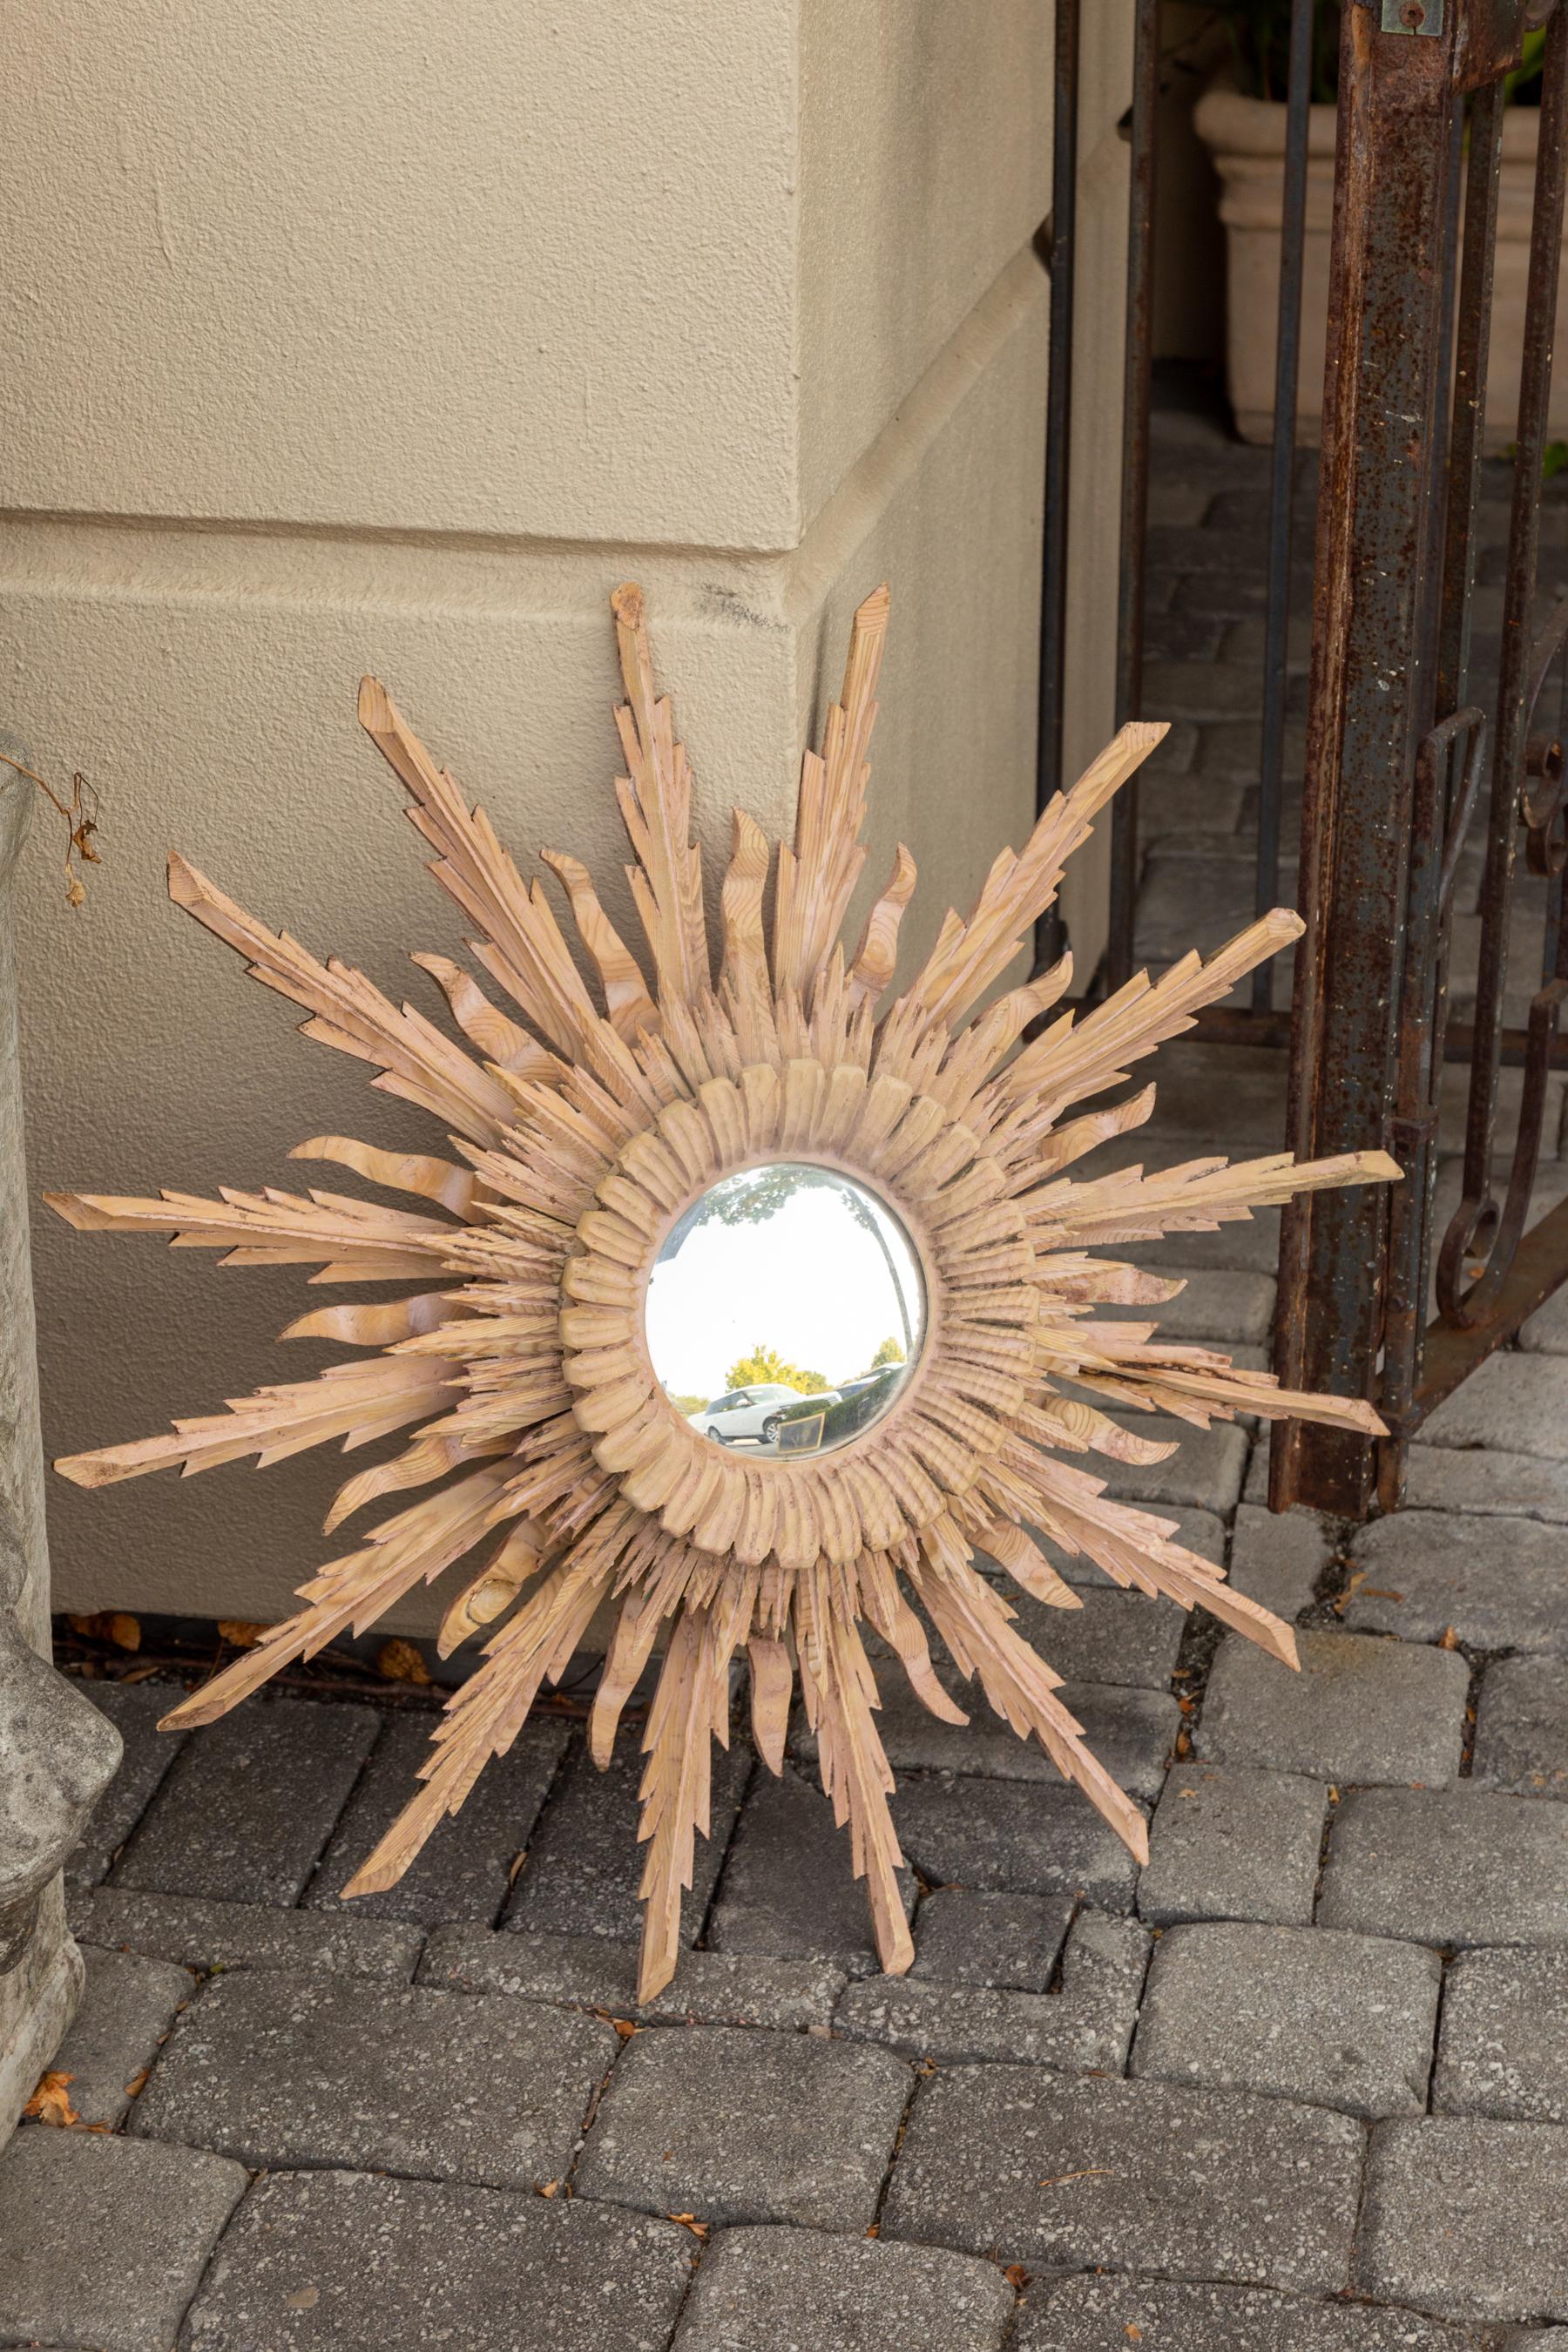 A French vintage bleached wood sunburst convex mirror from the mid-20th century, with rays of varying heights. Born in France during the mid-century period, this exquisite mirror charms us with its unusual bleached finish and graceful lines.